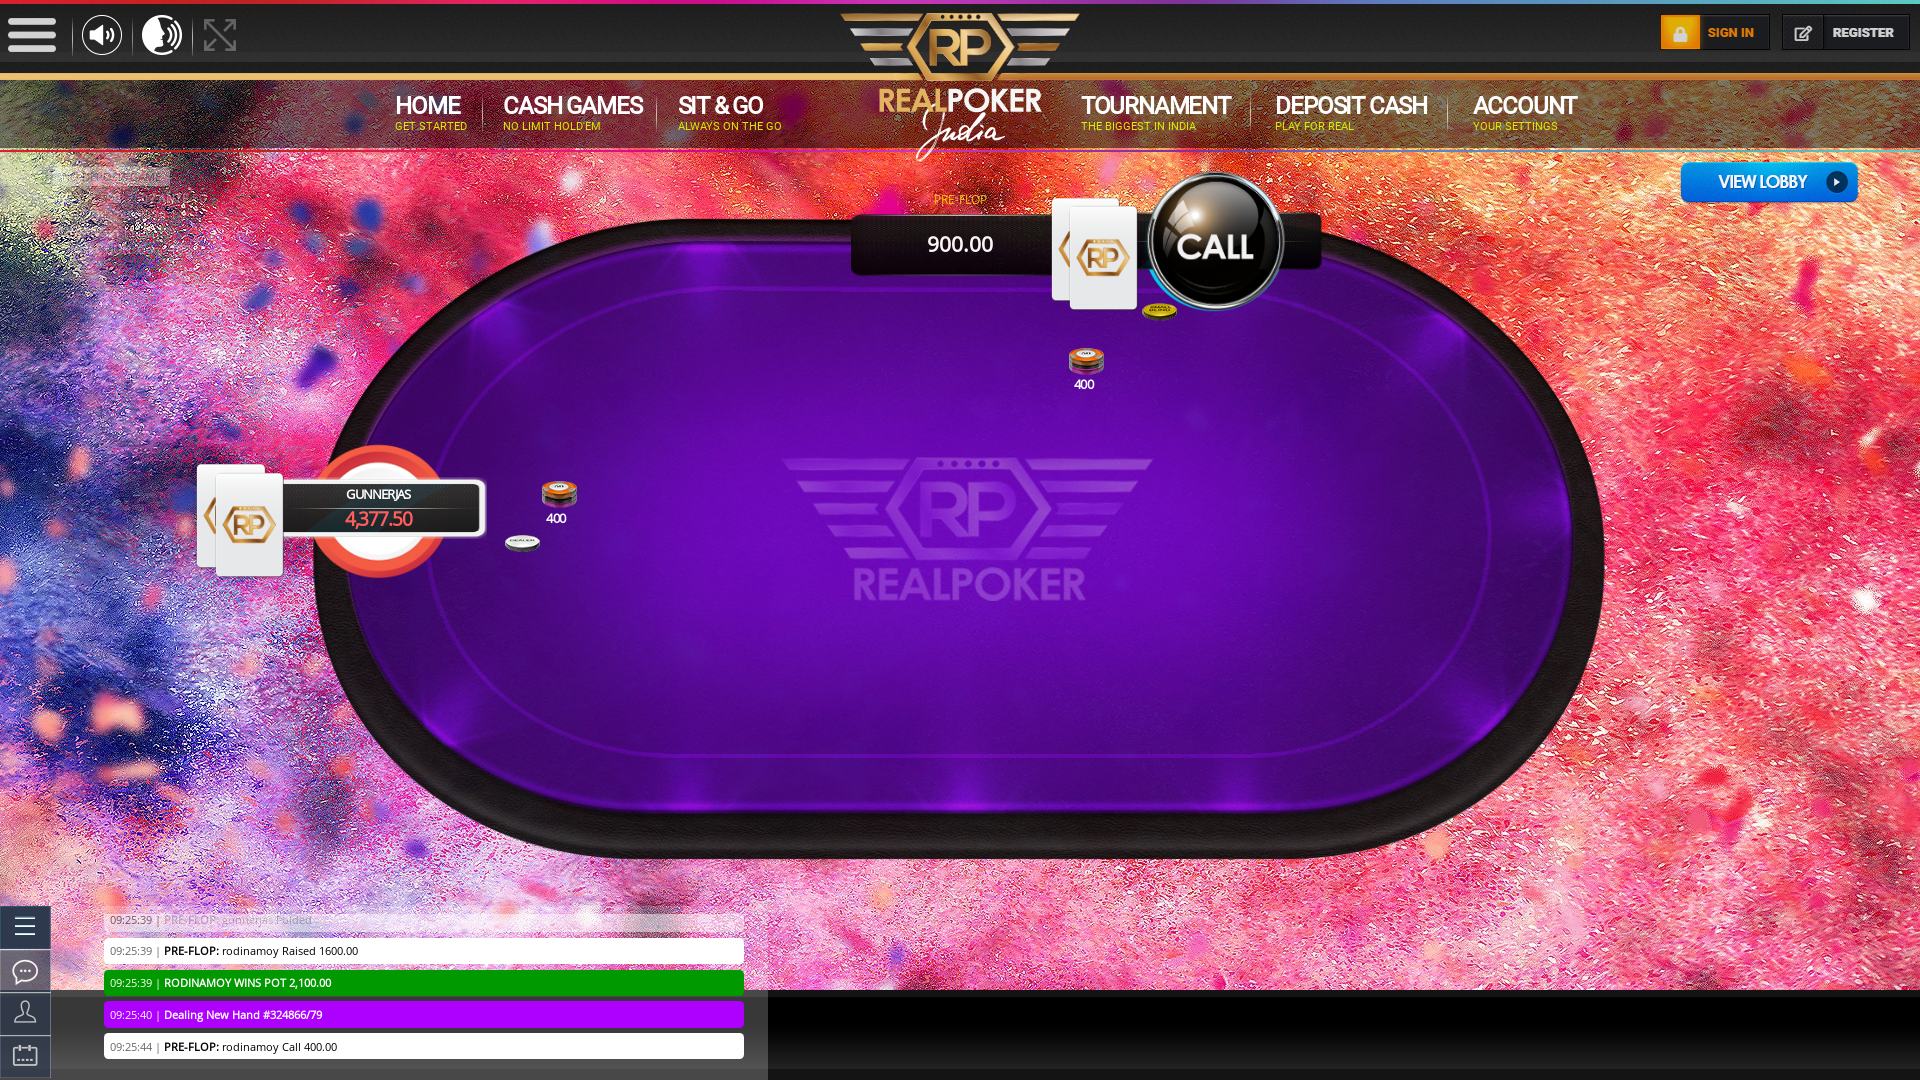 Online poker on a 10 player table in the 61st minute match up